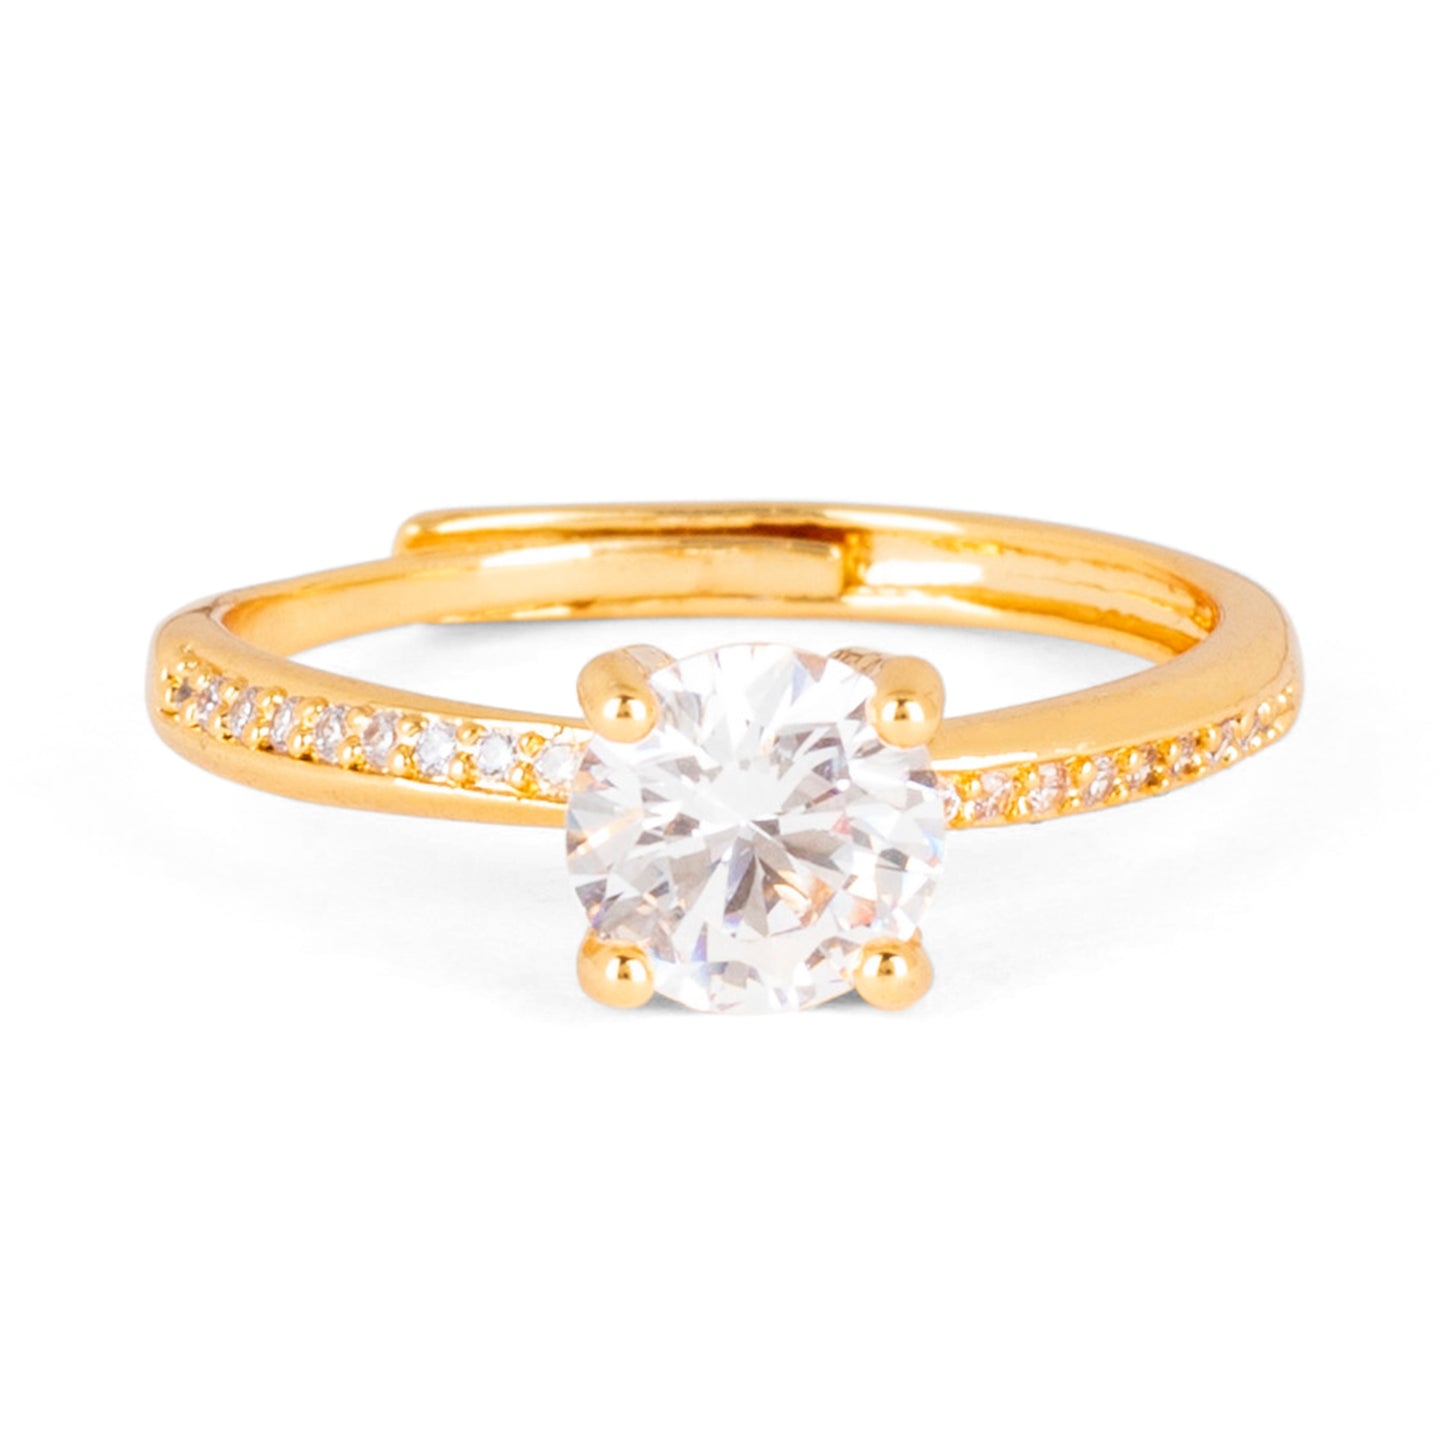 Leading Lady Solitaire Gold Ring in Gold Plating and CZ Stones (Adjustable)